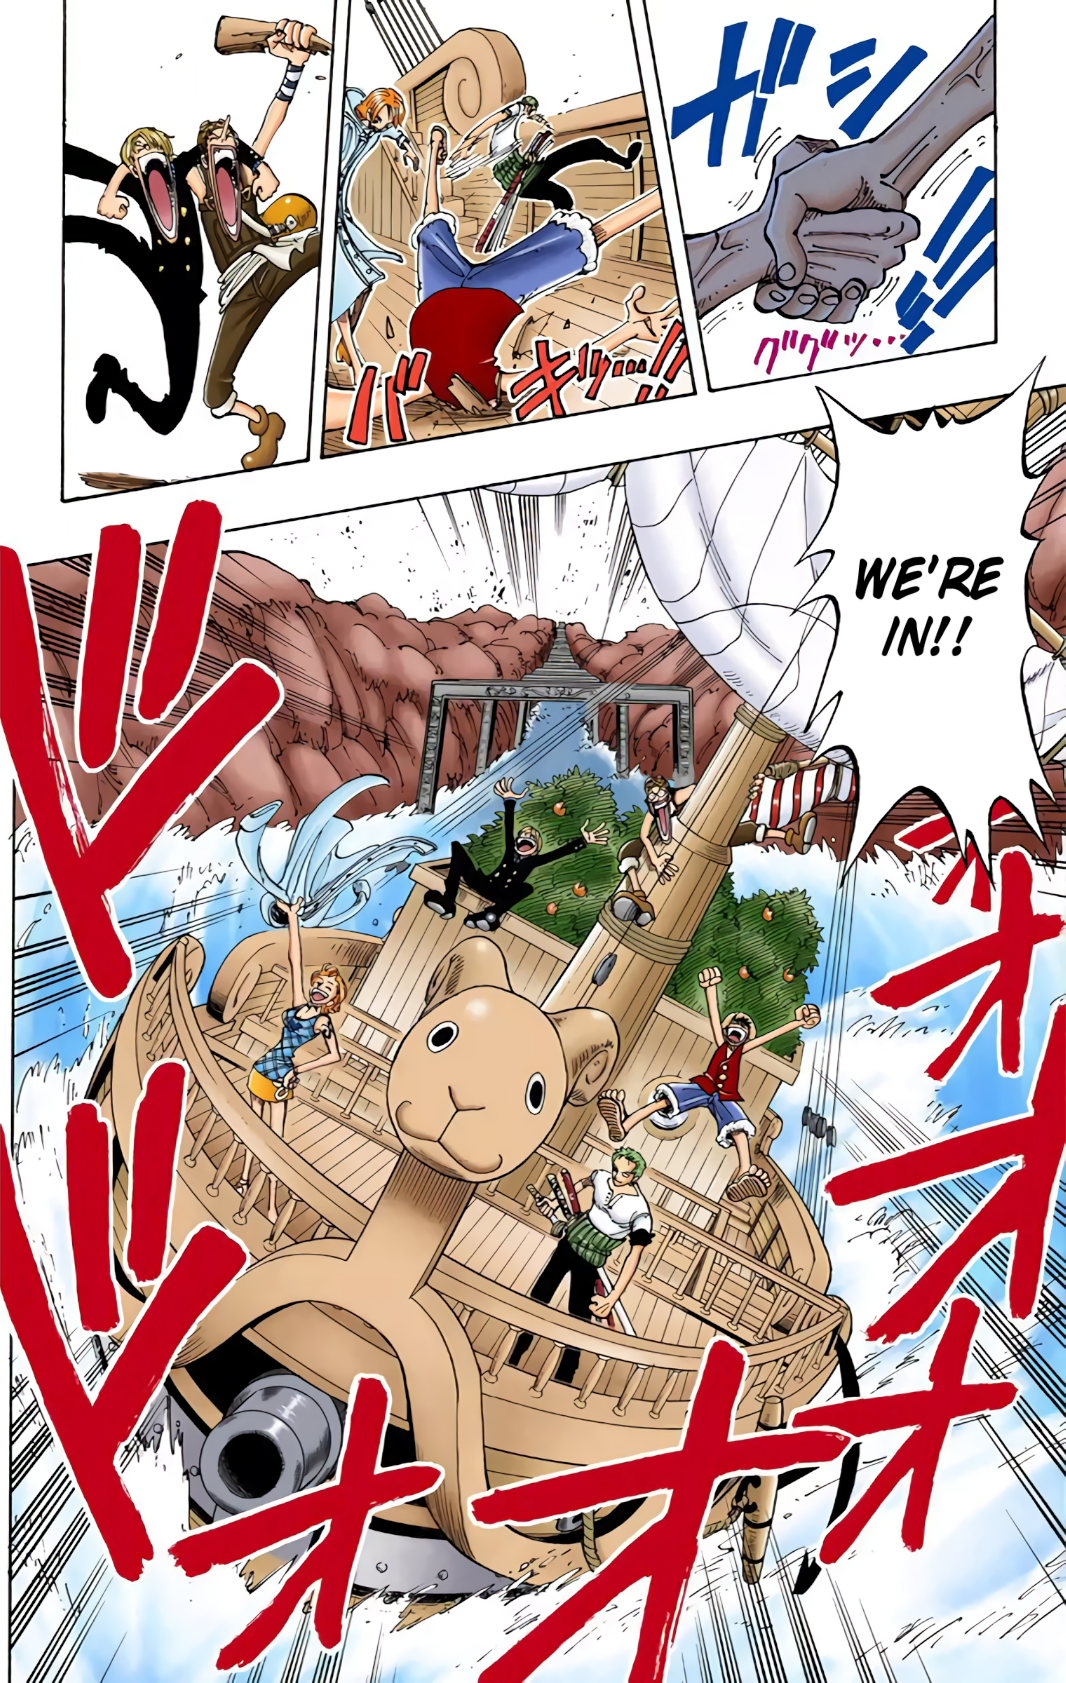 The Straw Hats take an unlikely route in One Piece Ch. 101 "Reverse Mountain" (1999), Shueisha. Words and art by Eiichiro Oda.